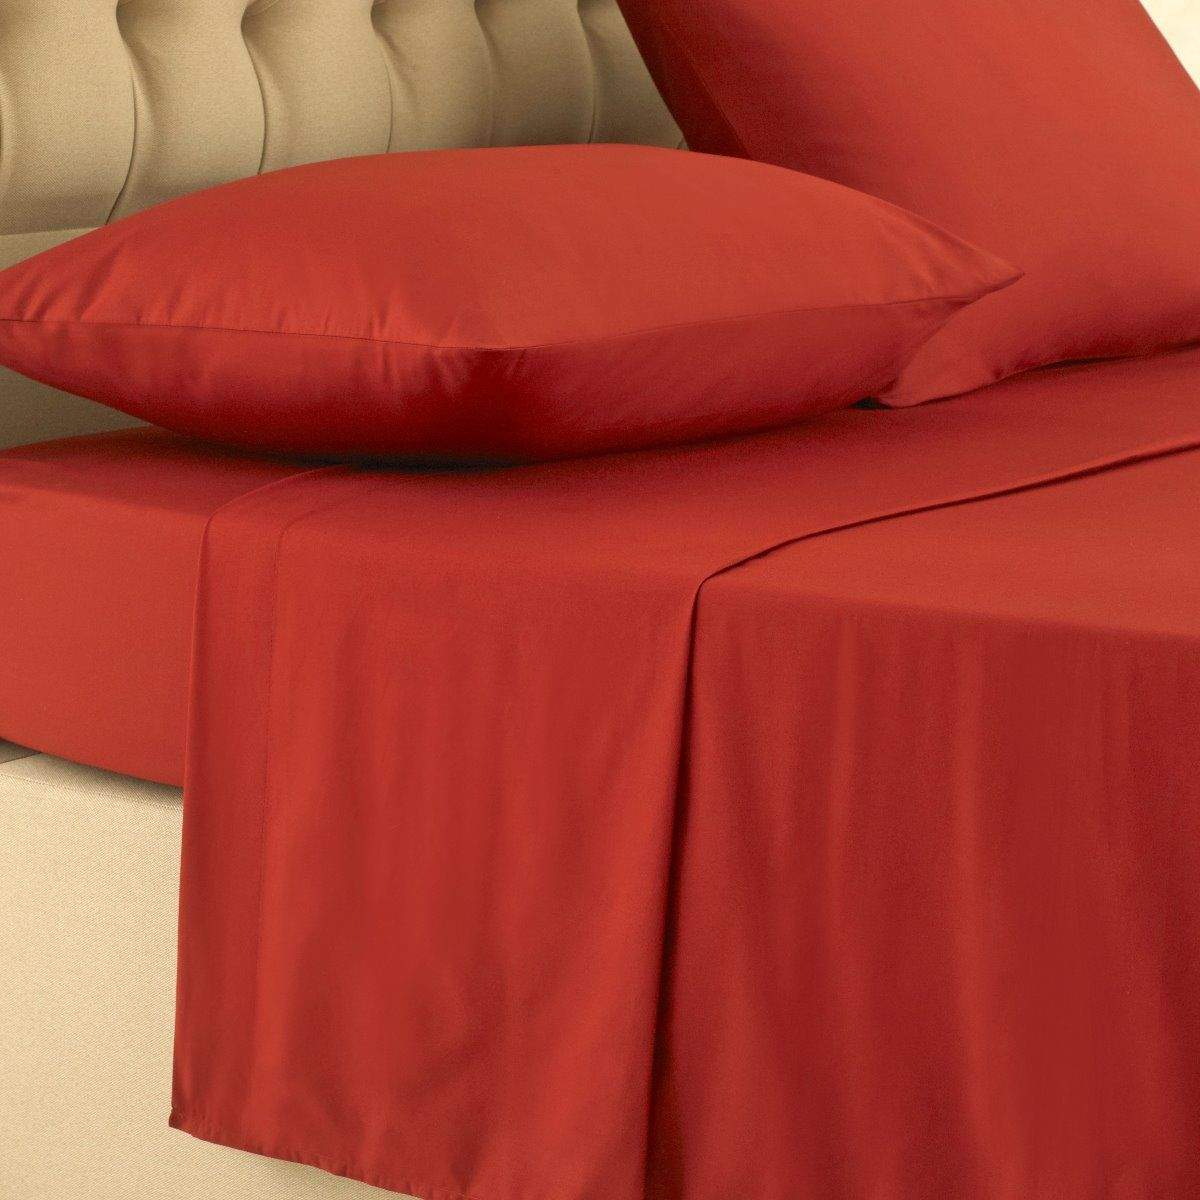 200 Thread Count 100% Egyptian Cotton Flat Sheet Or Pillowcases Bed and Bath Linen